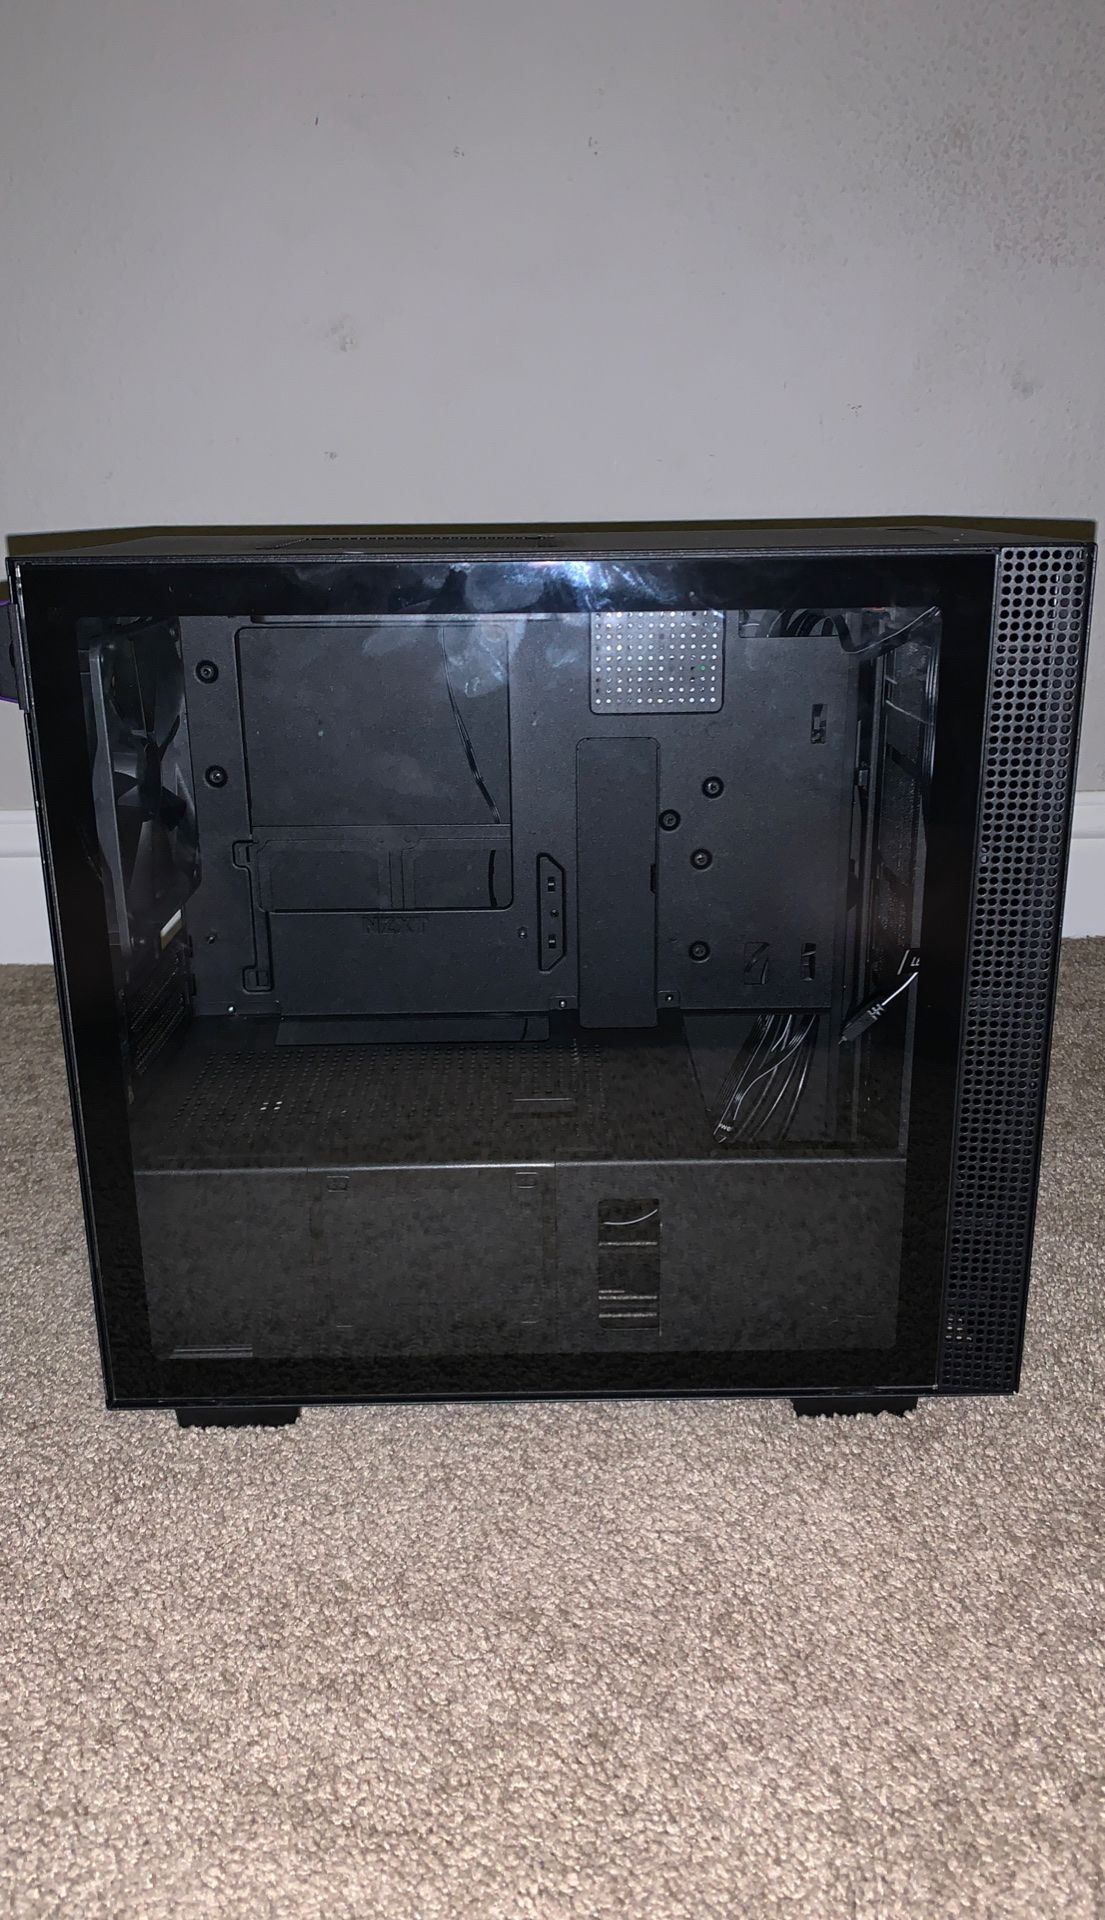 NZXT gaming computer case